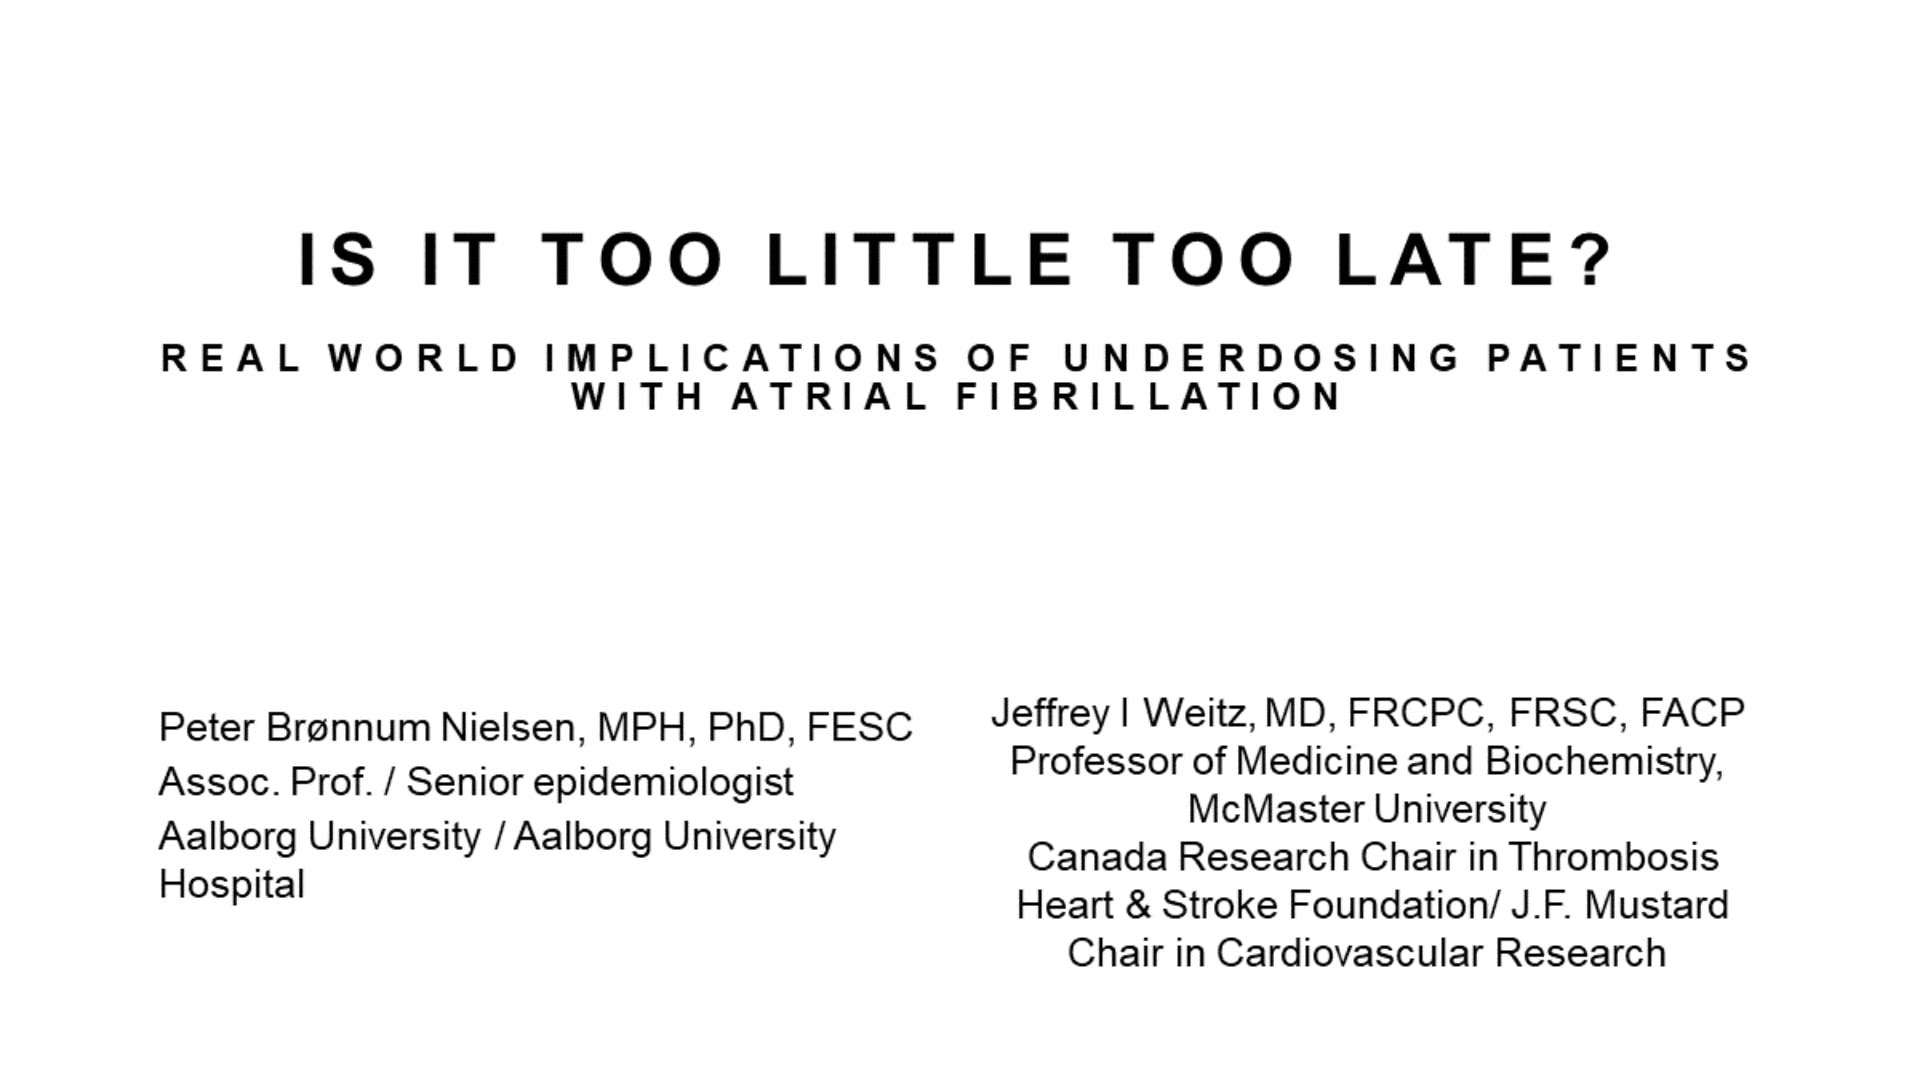 Webinar – “Is It Too Little Too Late? Real World Implications of Underdosing Patients With AFIB”- 53min